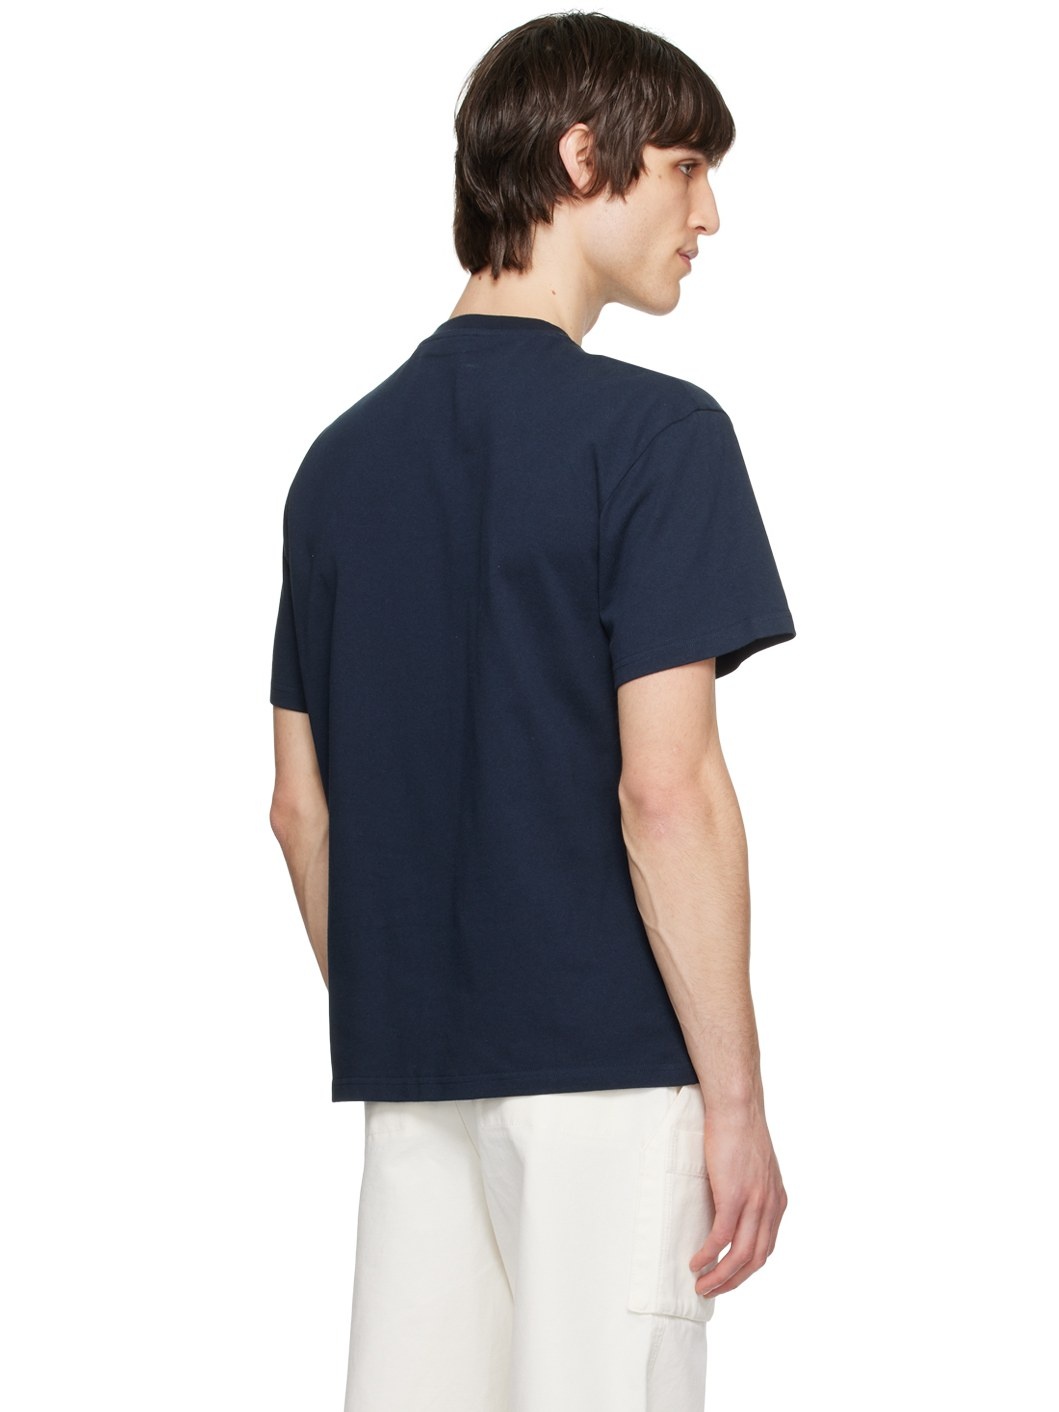 Navy Embroidered T-Shirt - 3